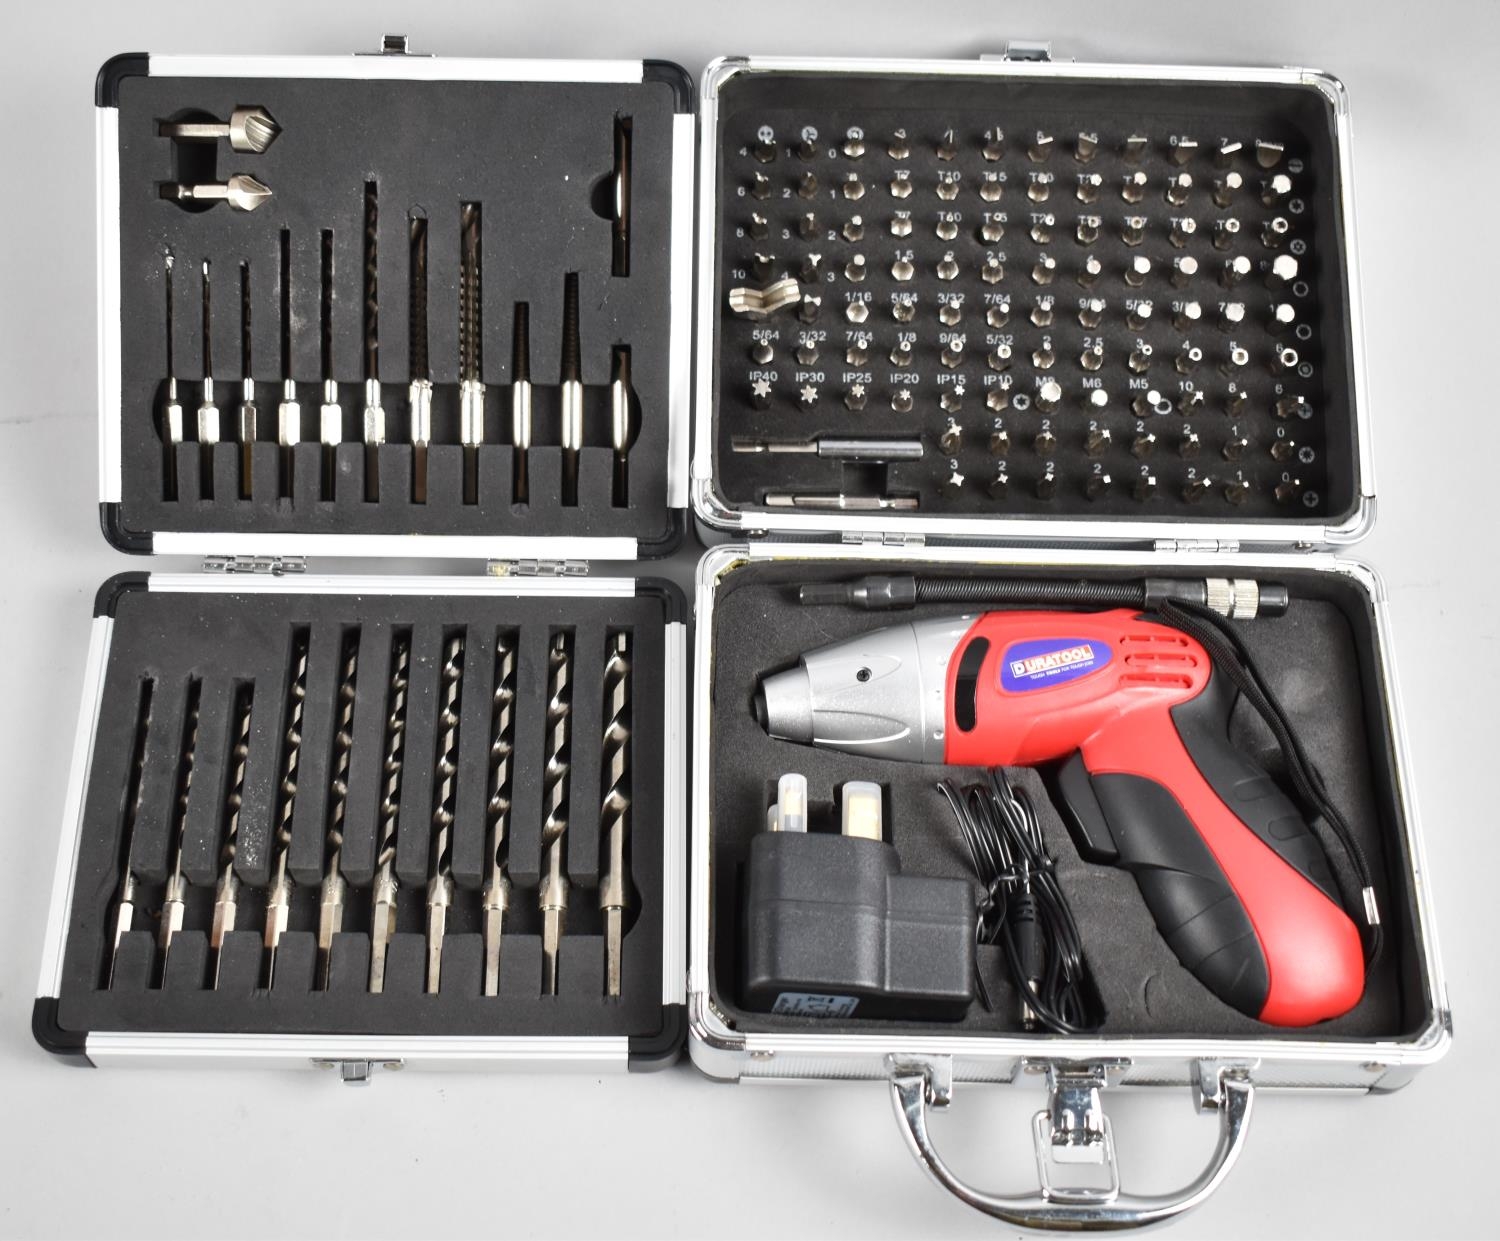 A Modern Duratool Electric Screwdriver with Interchangeable Heads together with a Cased Set of Drill